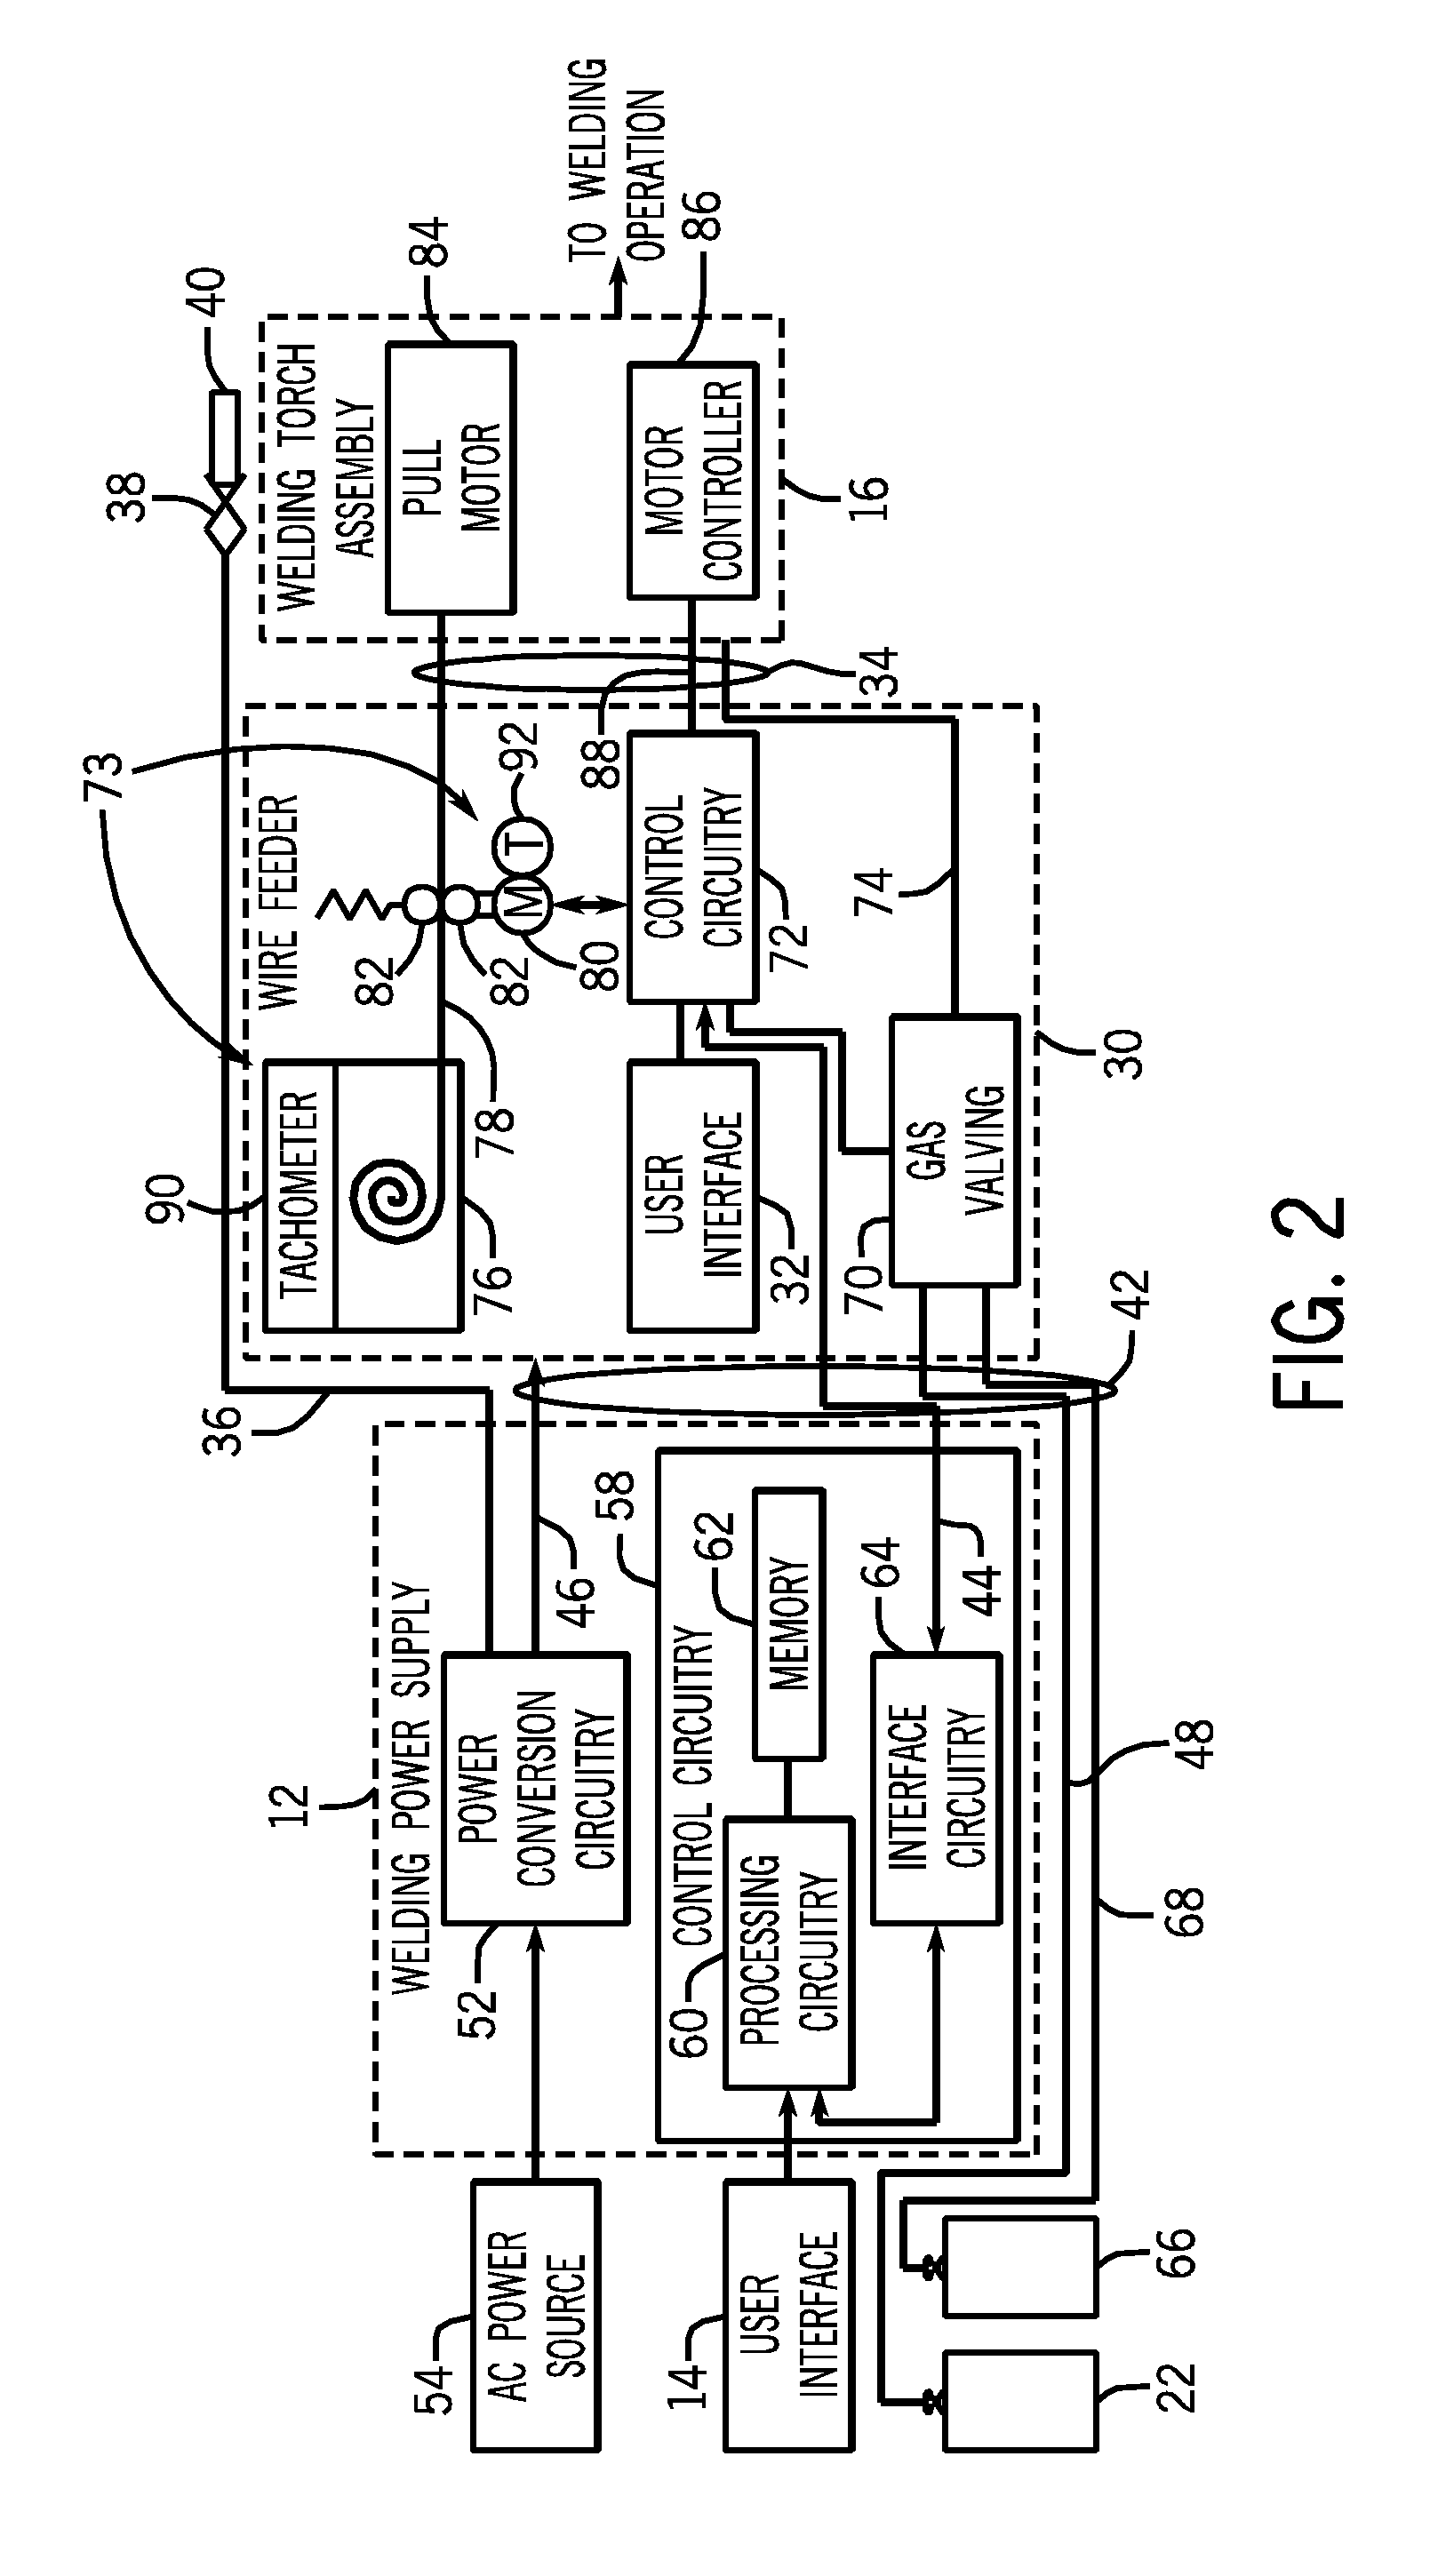 Wire feeding systems and devices